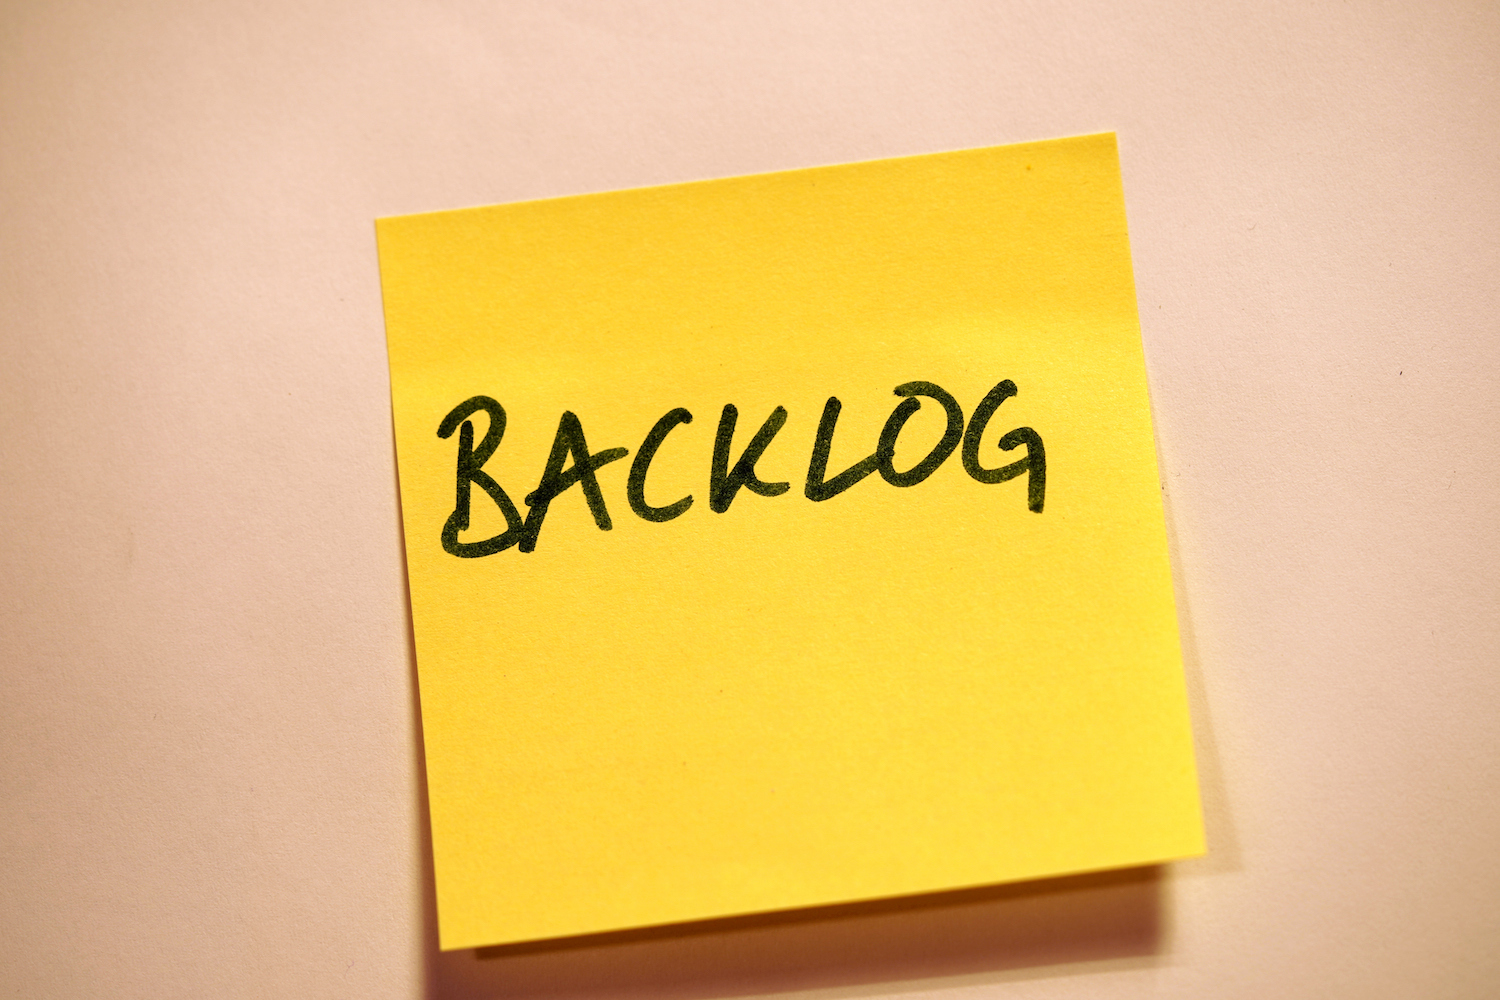 Yellow sticky note with "backlog" written on it in black marker